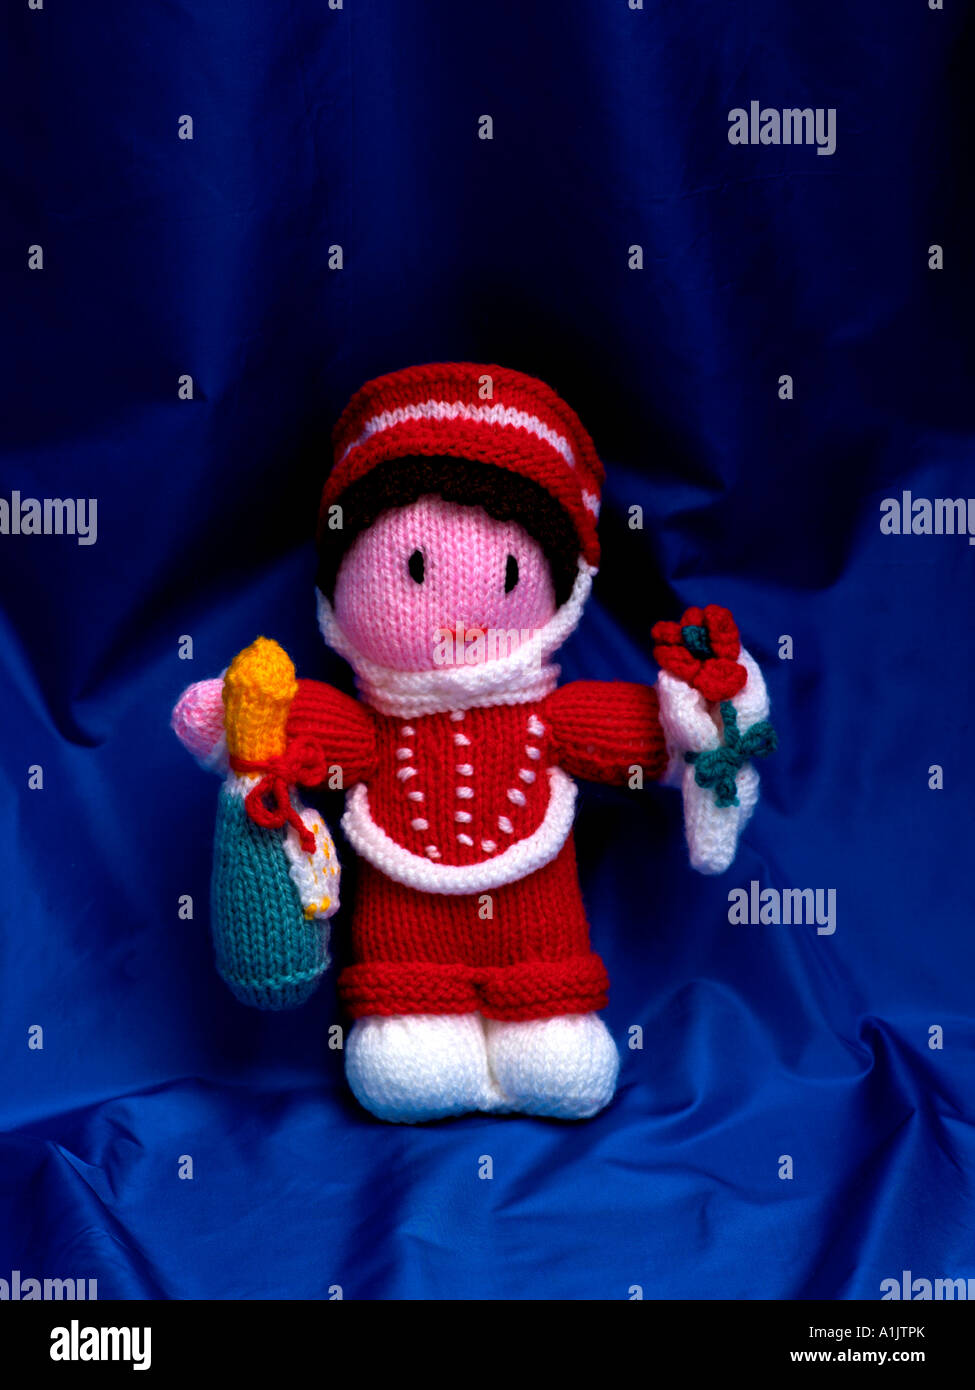 Soft Hand Made KnittedToy Stock Photo